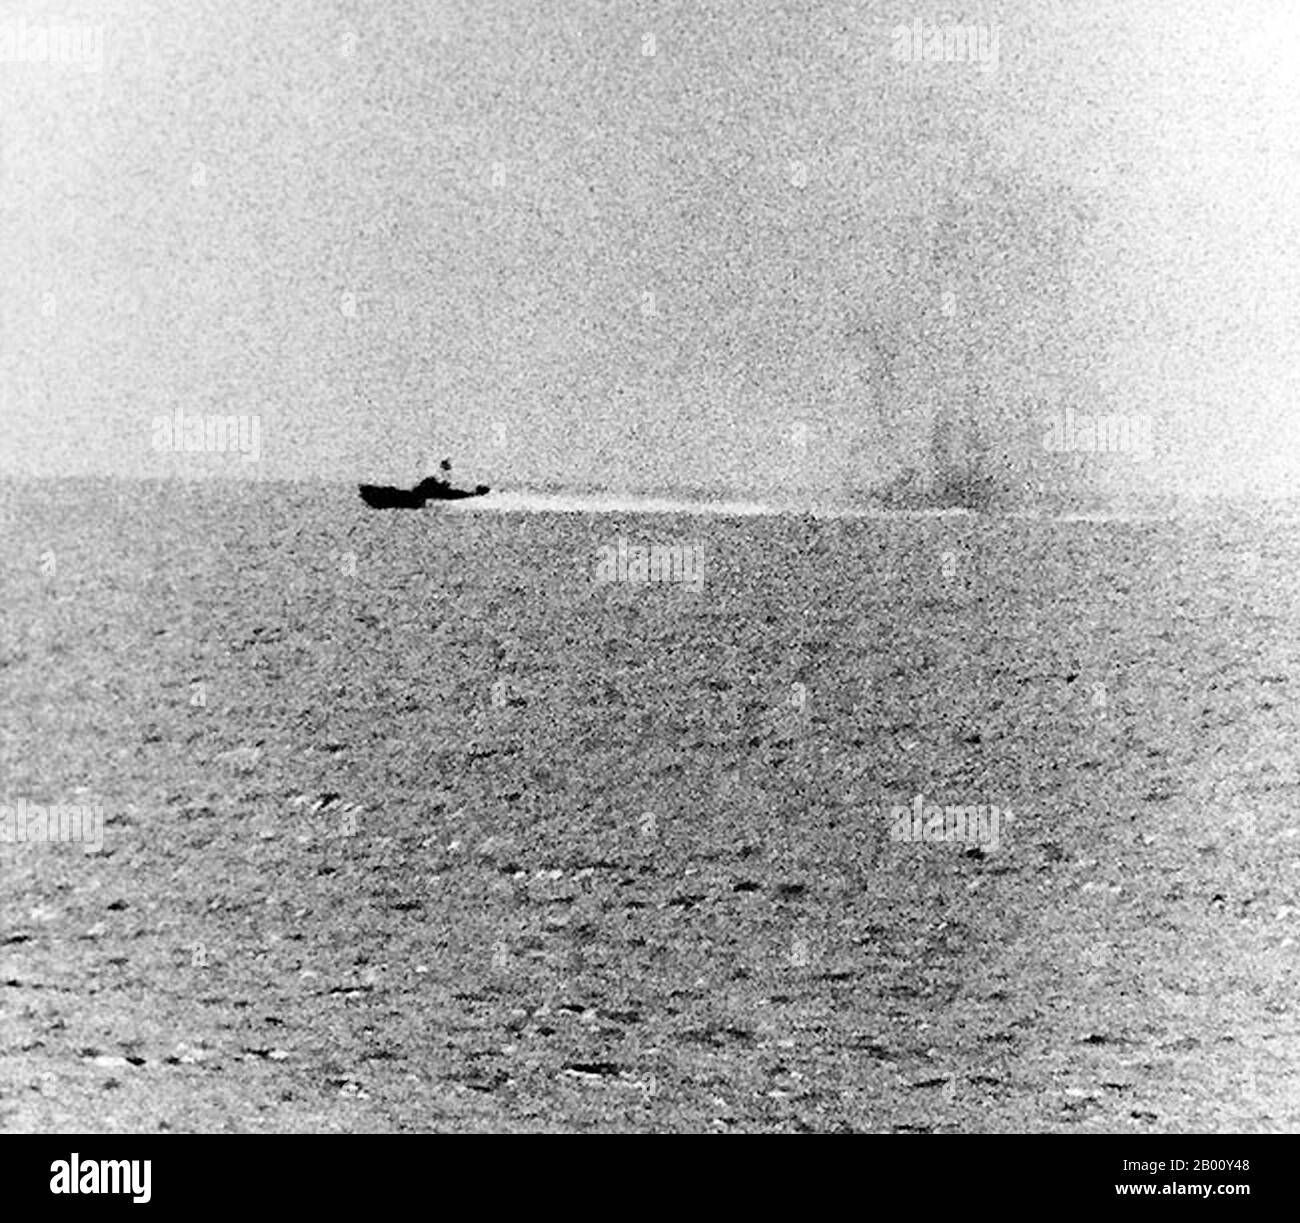 Vietnam: The Gulf of Tonkin Incident - 'North Vietnamese motor torpedo boat attacking USS Maddox, 2 August 1964'. US Navy photograph 711524.  The Gulf of Tonkin Incident, or the USS Maddox Incident, are the names given to two separate incidents, one disputed, involving North Vietnam and the United States in the waters of the Gulf of Tonkin. On August 2, 1964, the destroyer USS Maddox was engaged by three North Vietnamese Navy torpedo boats of the 135th Torpedo Squadron. A sea battle resulted, in which the Maddox expended over 280 3' and 5' shells. Stock Photo